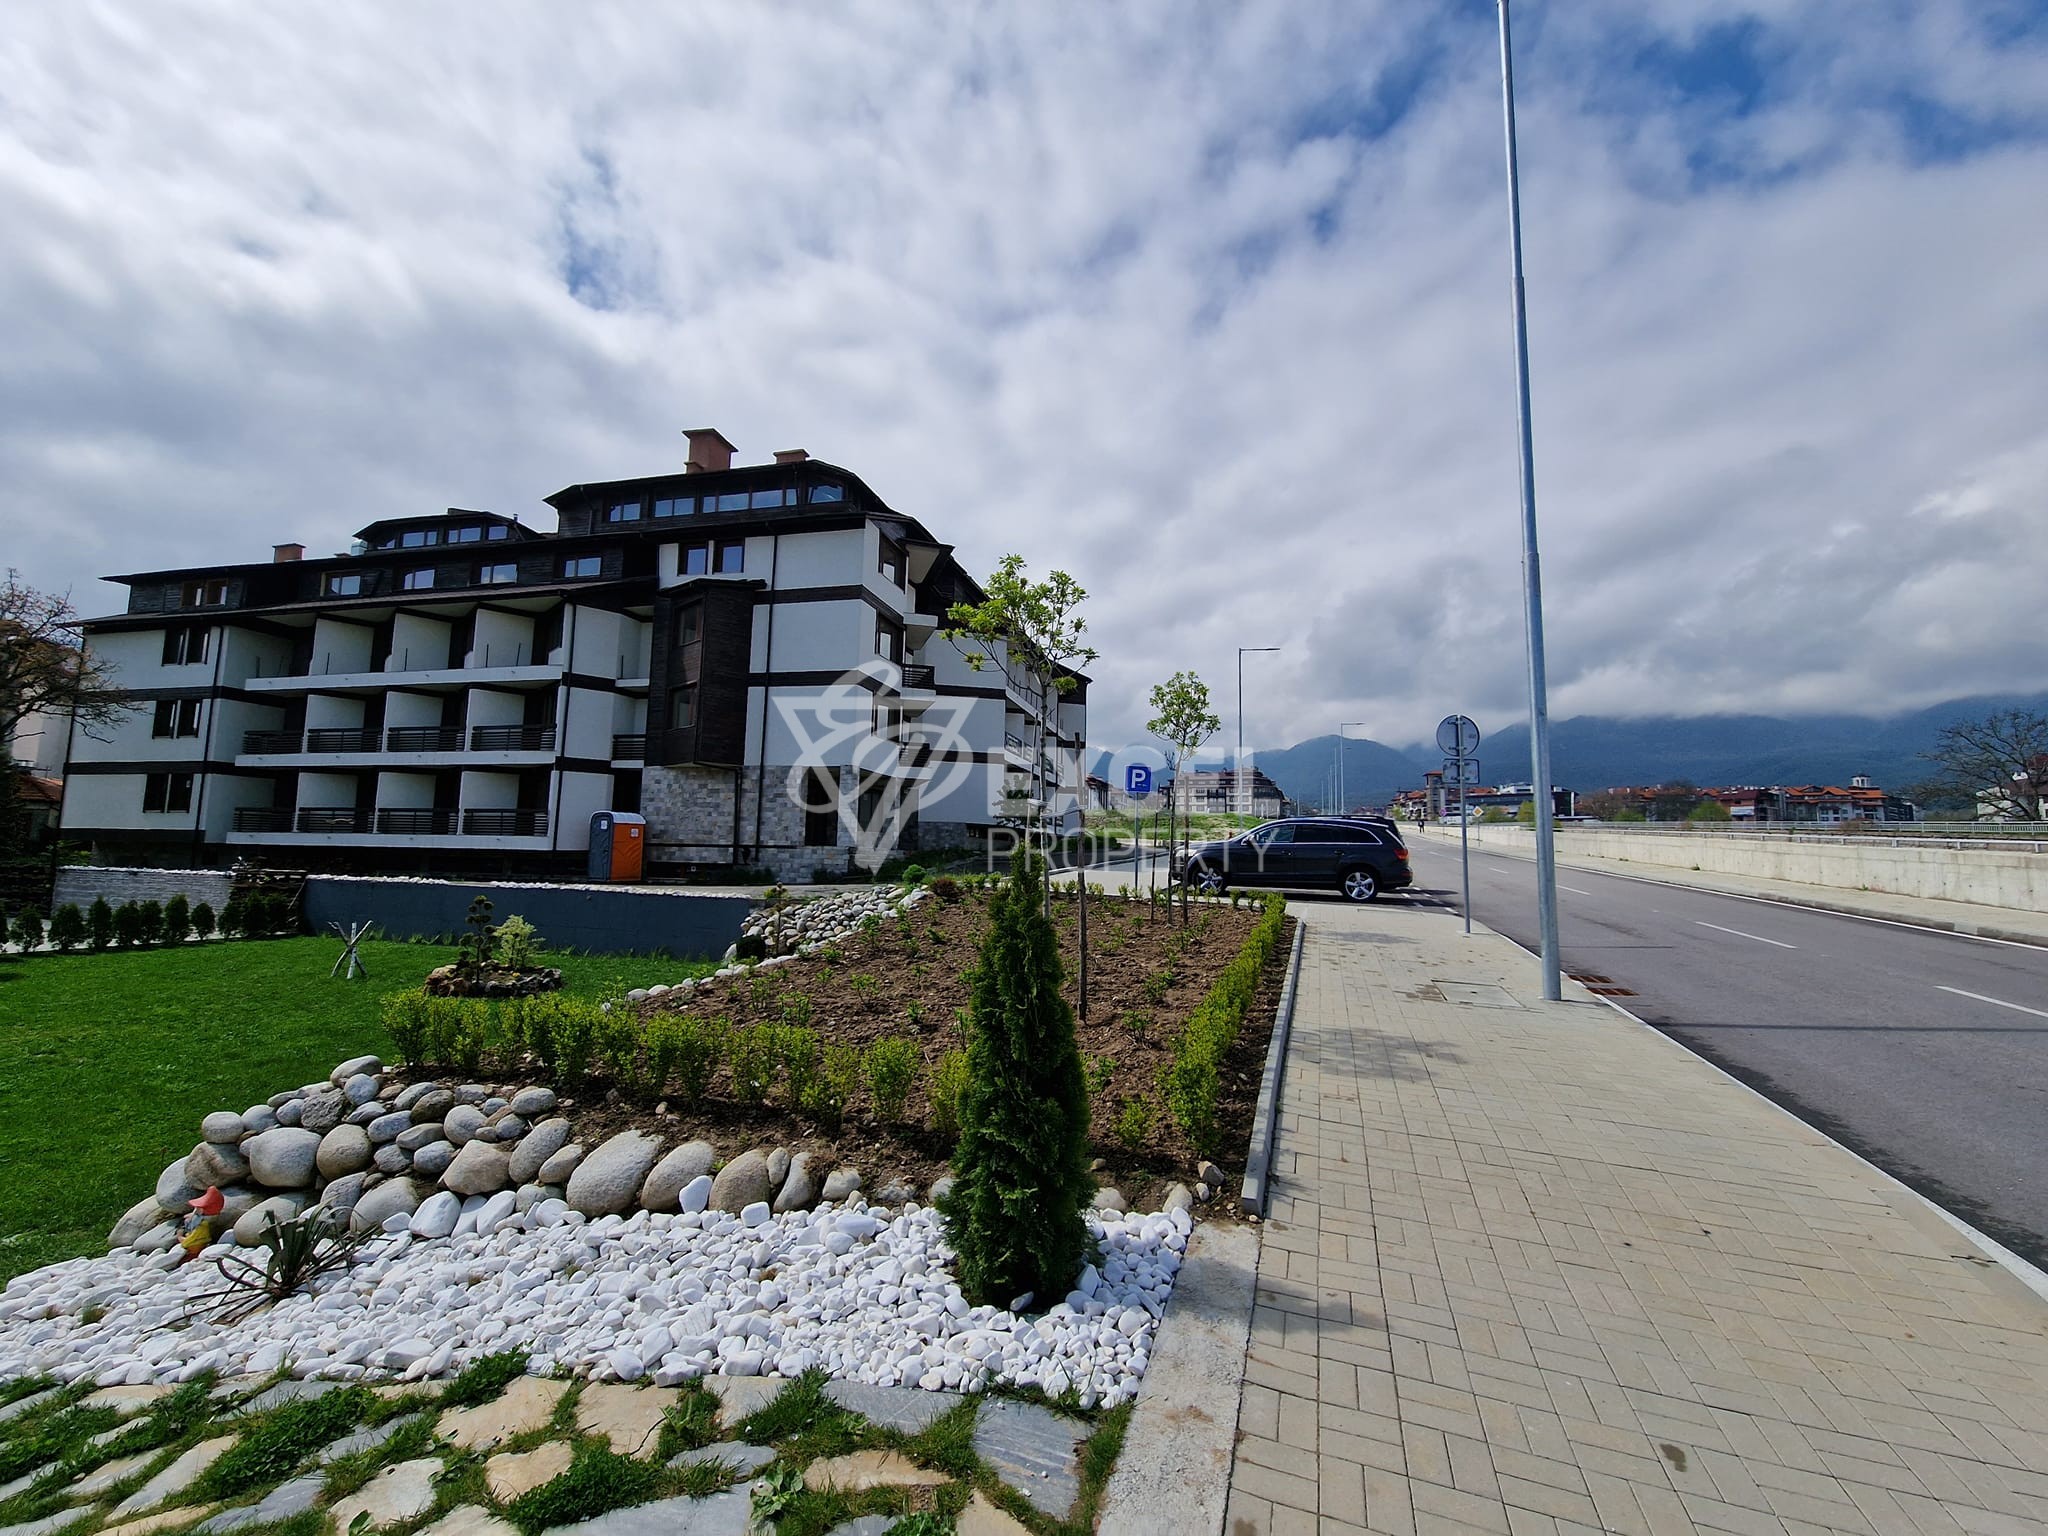 One-bedroom apartment for sale in Bansko! Excellent location!